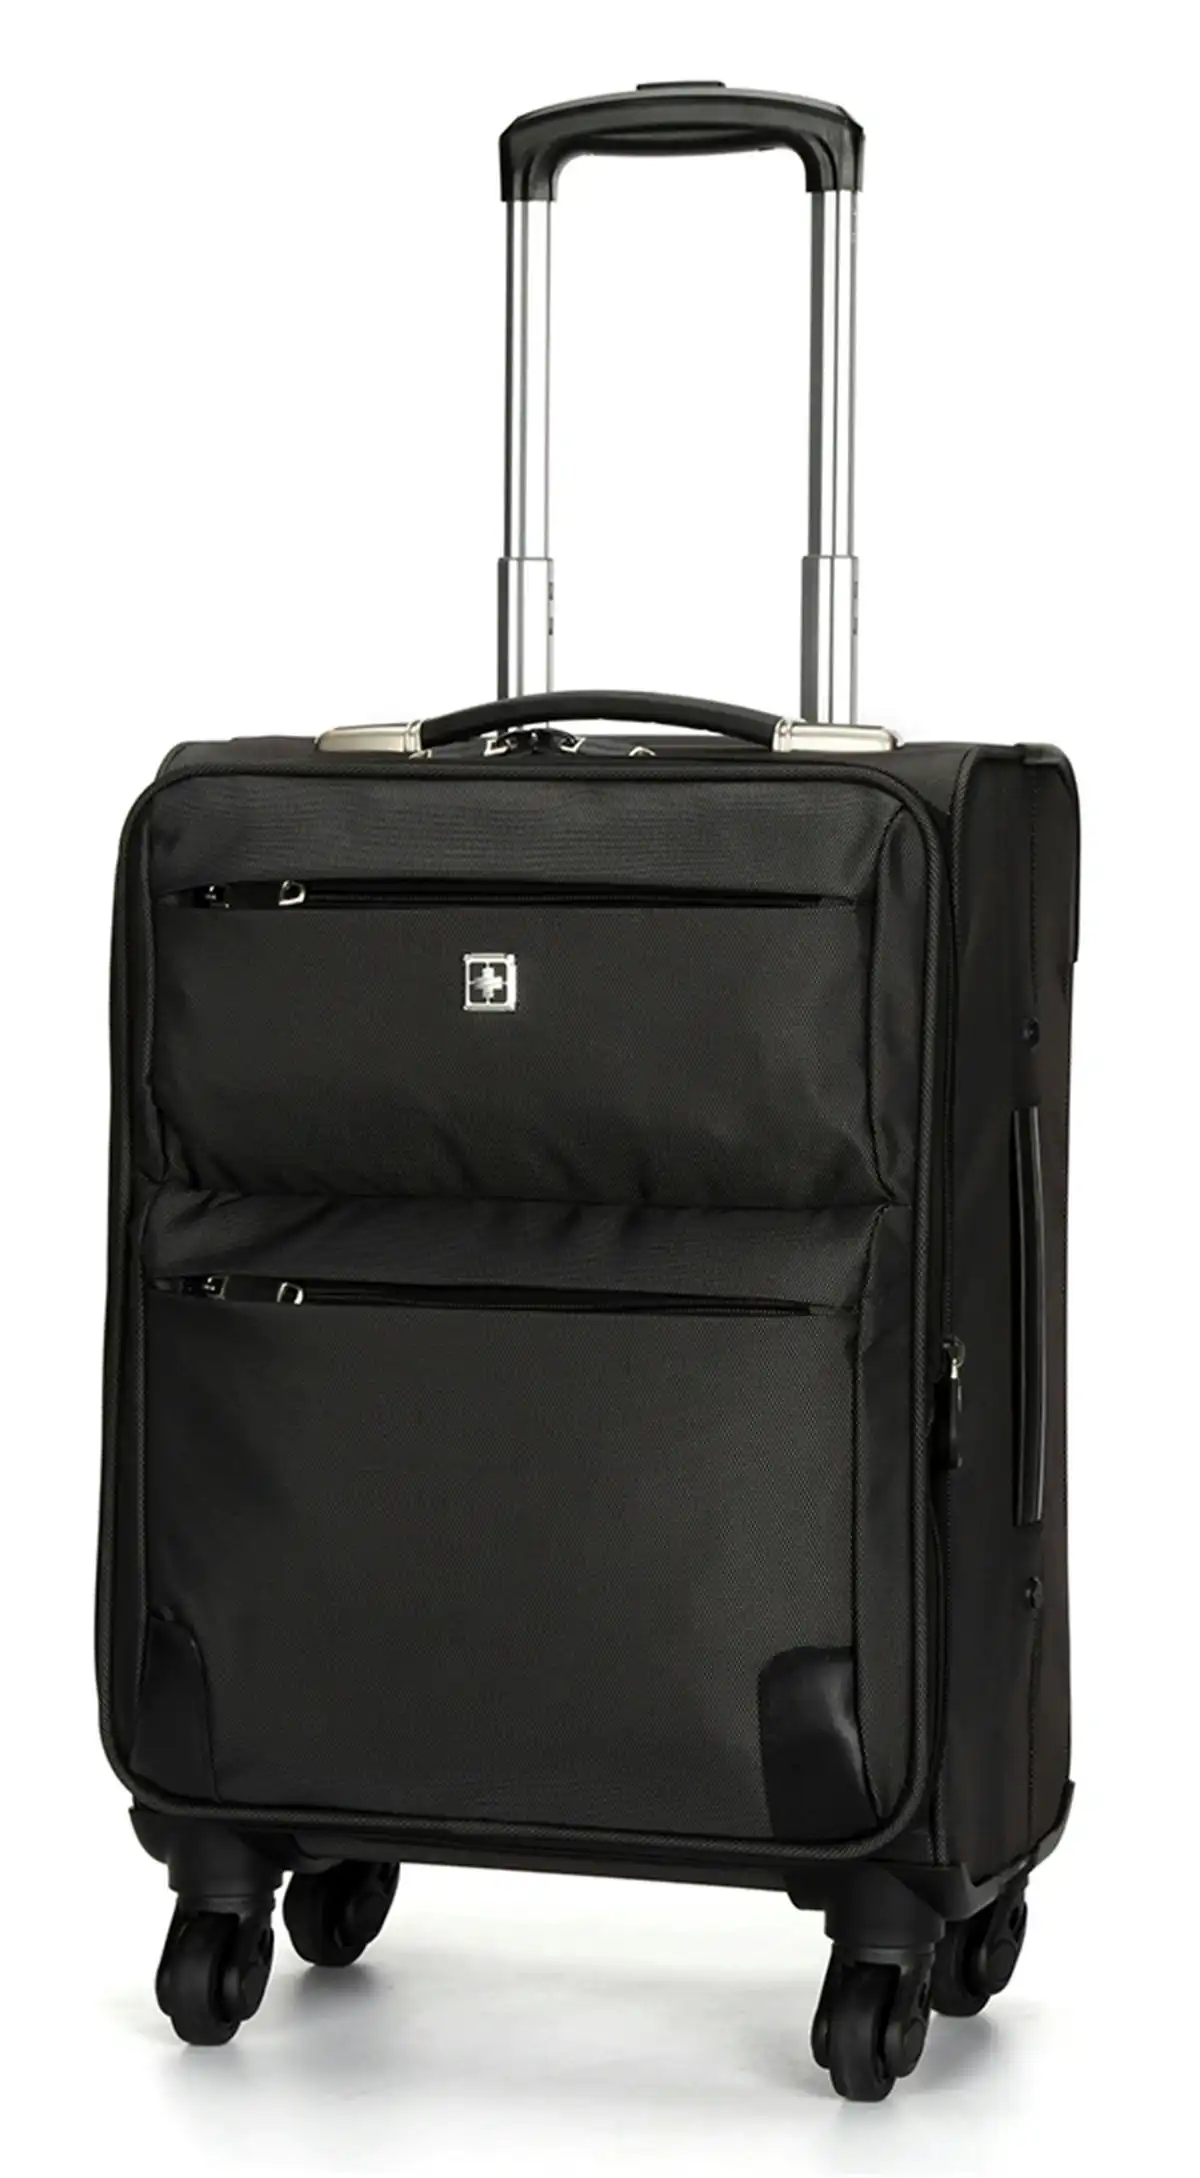 Suissewin Swiss Luggage Suitcase Lightweight 8 Wheels 360 Degree Rolling Carry on Softcase SN8918A Black